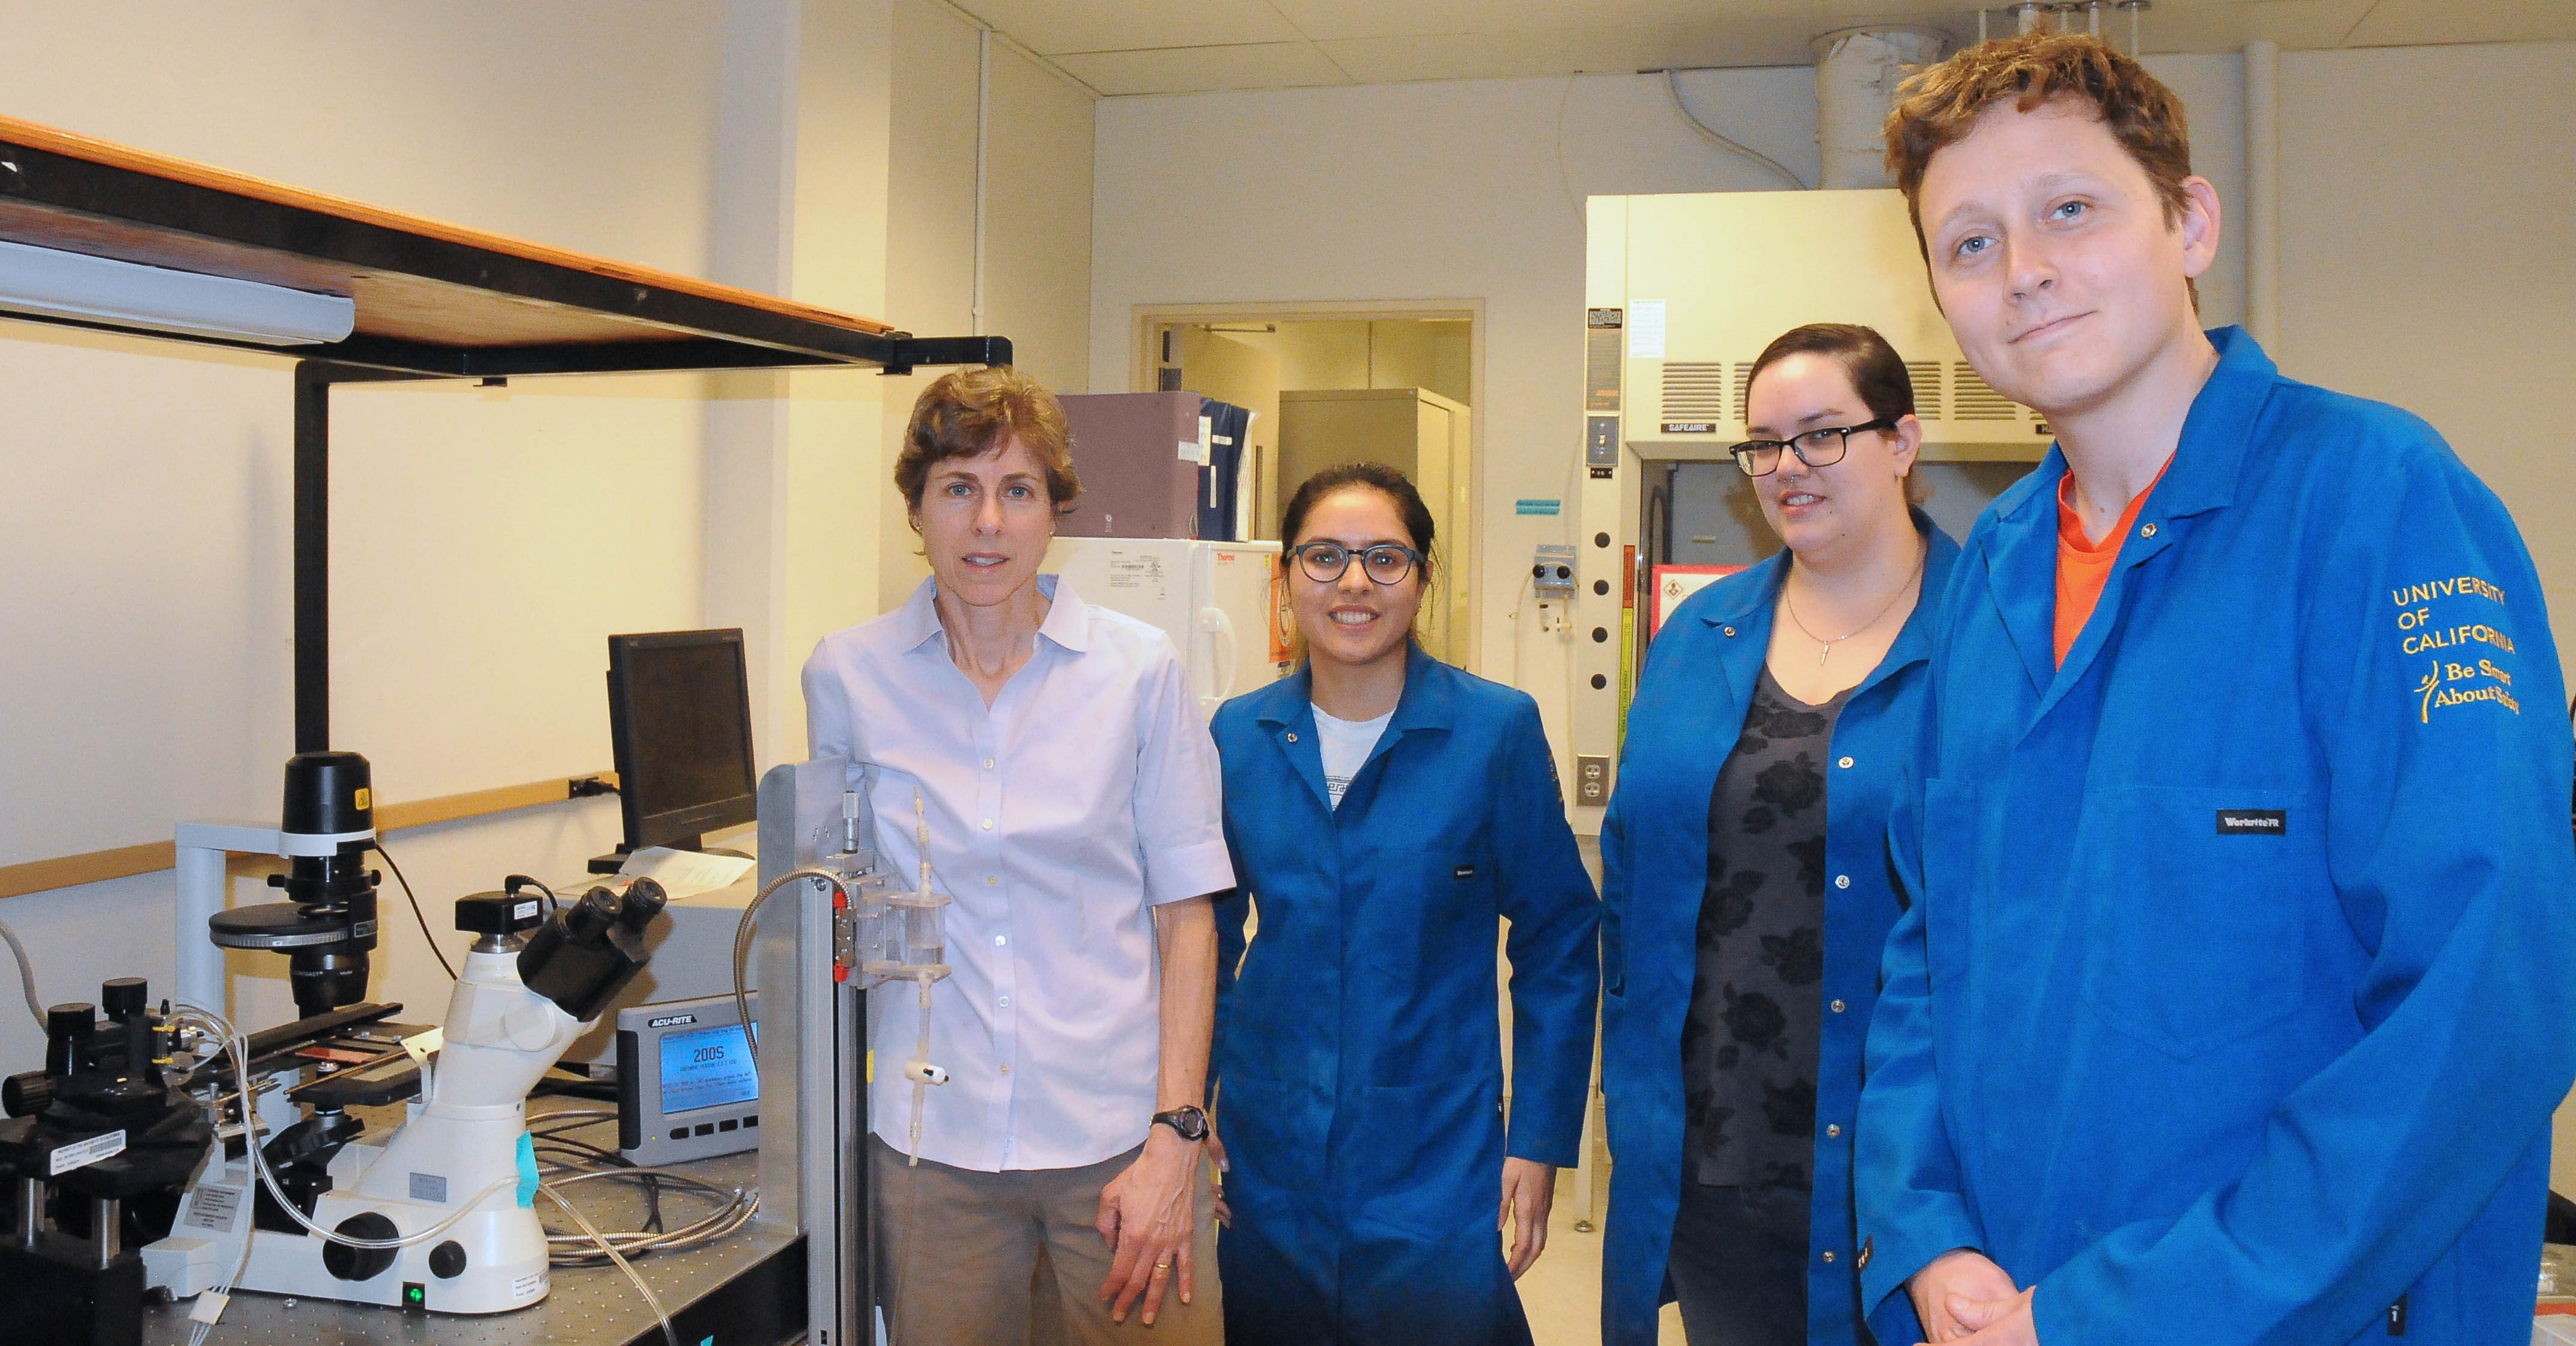 Dr. Longo and her students in the lab.